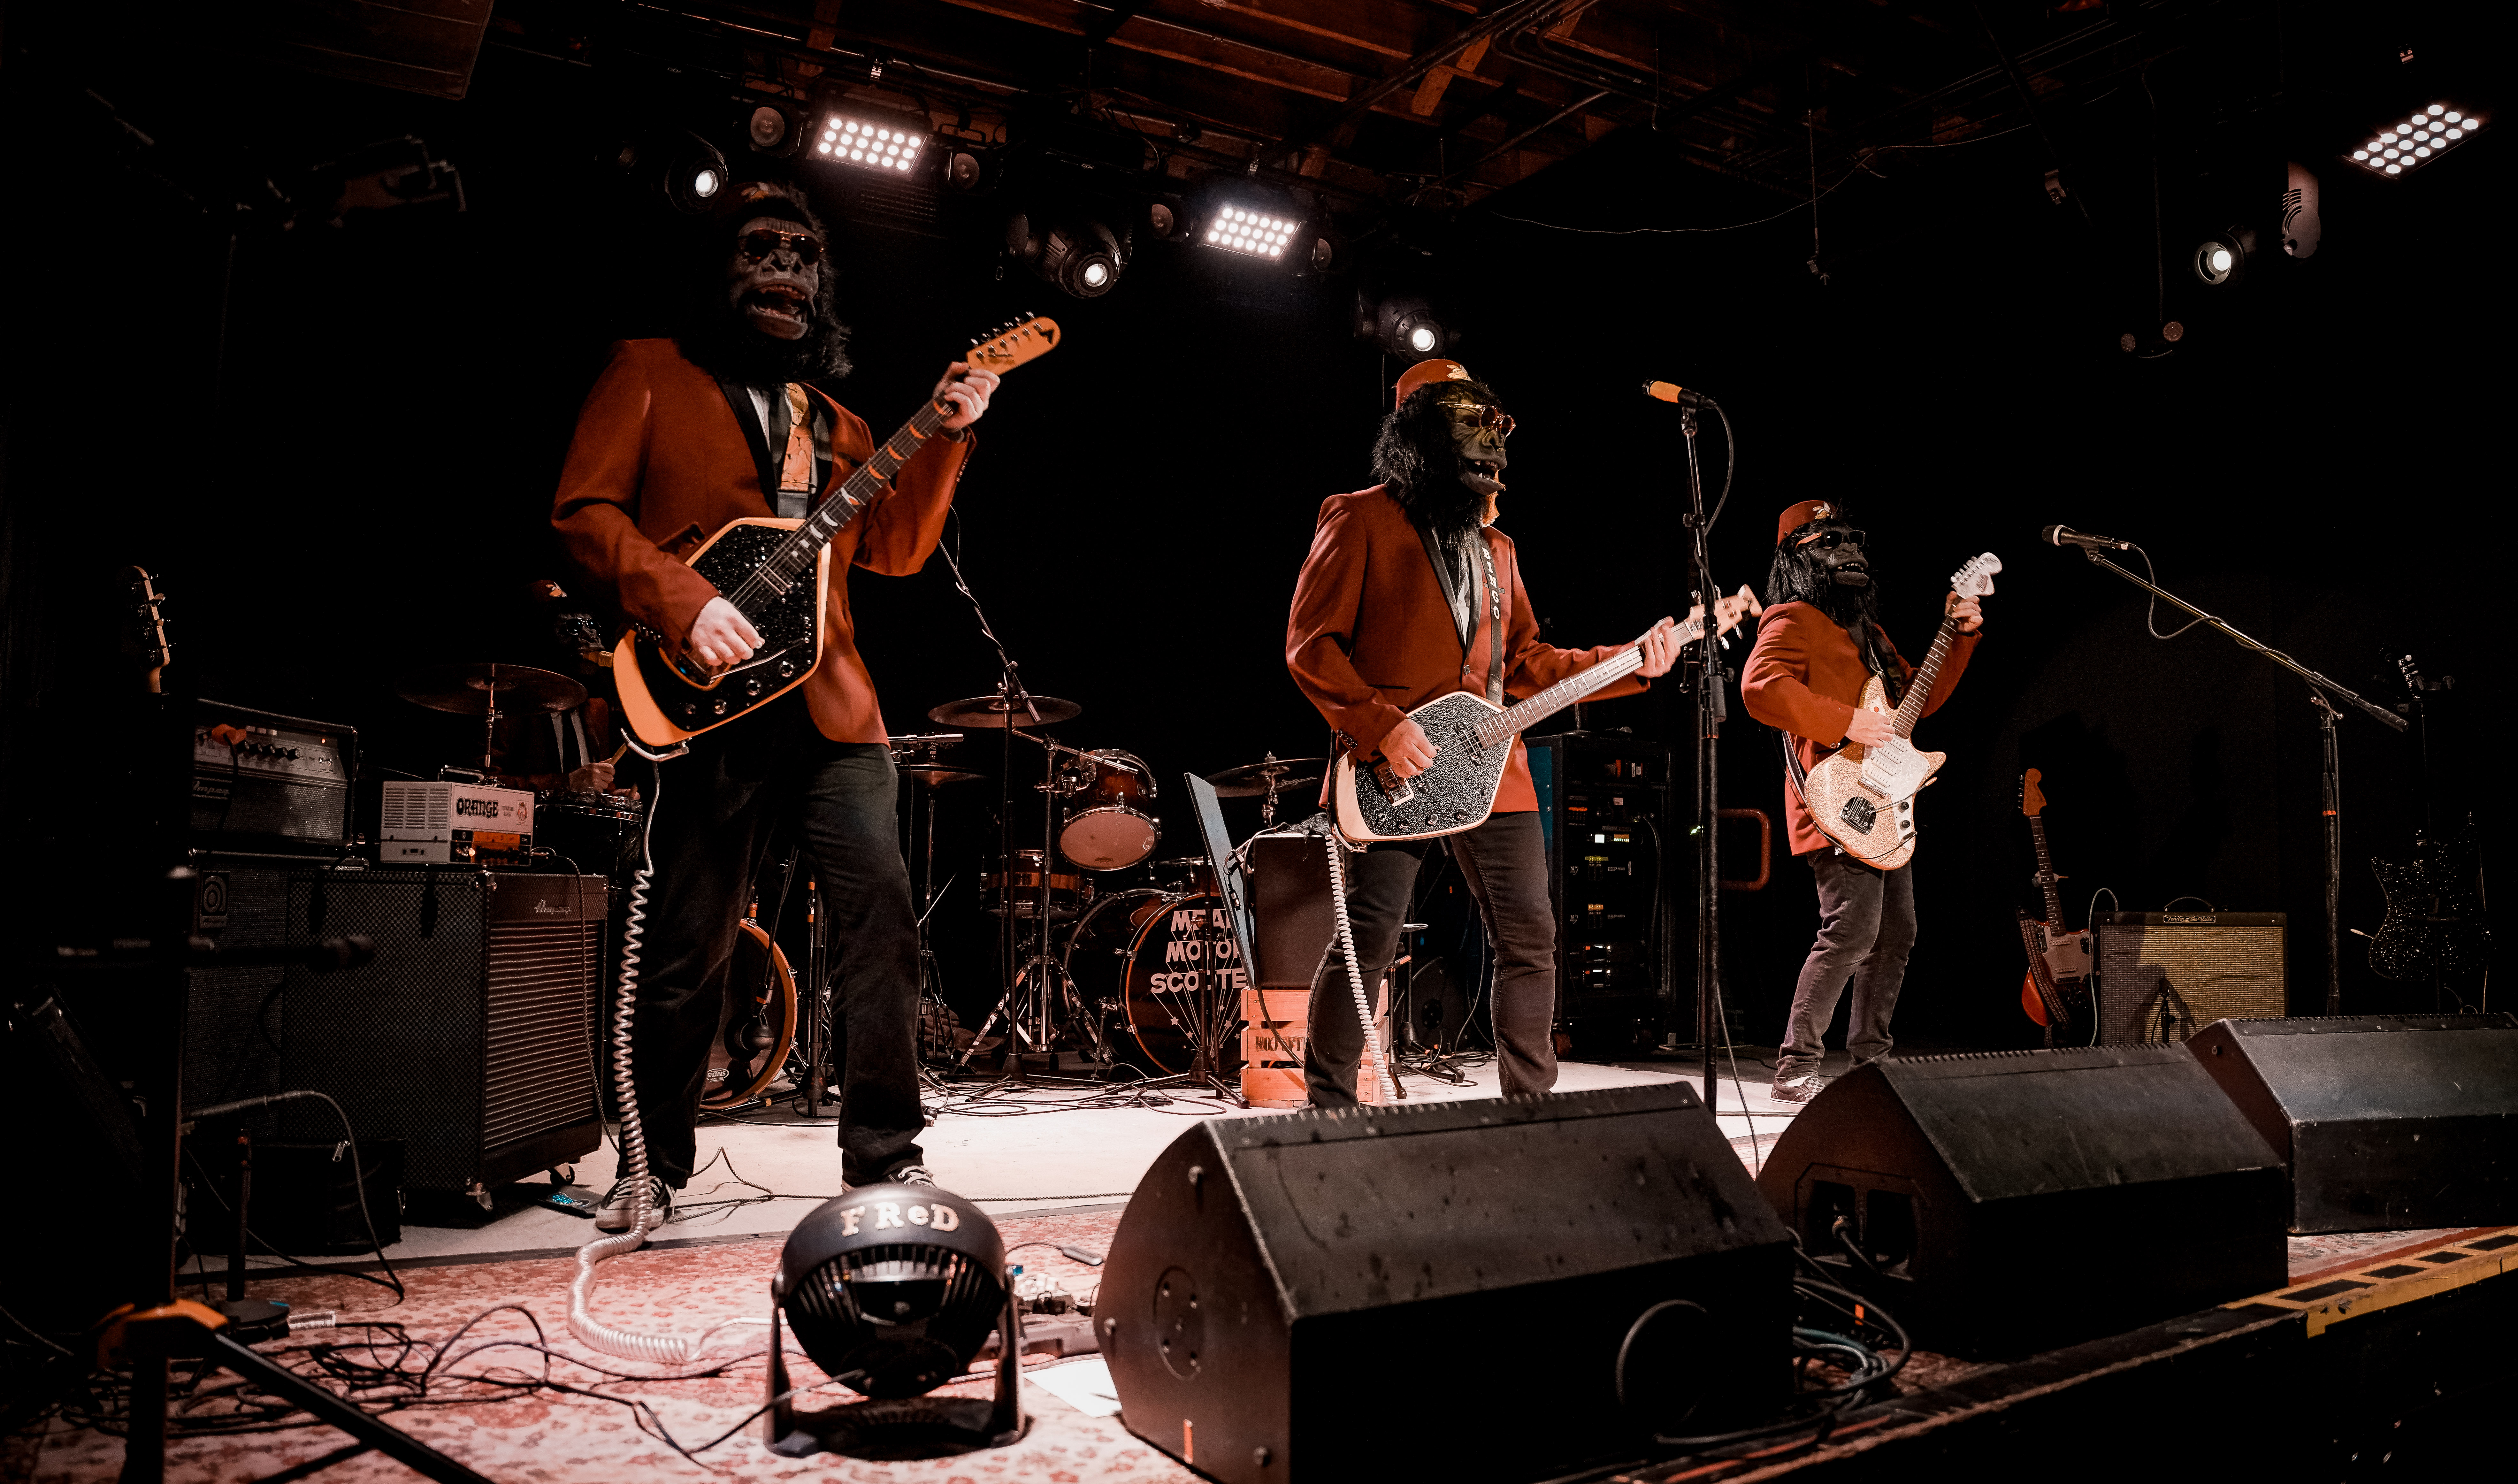 a full band on stage wearing gorilla costumes